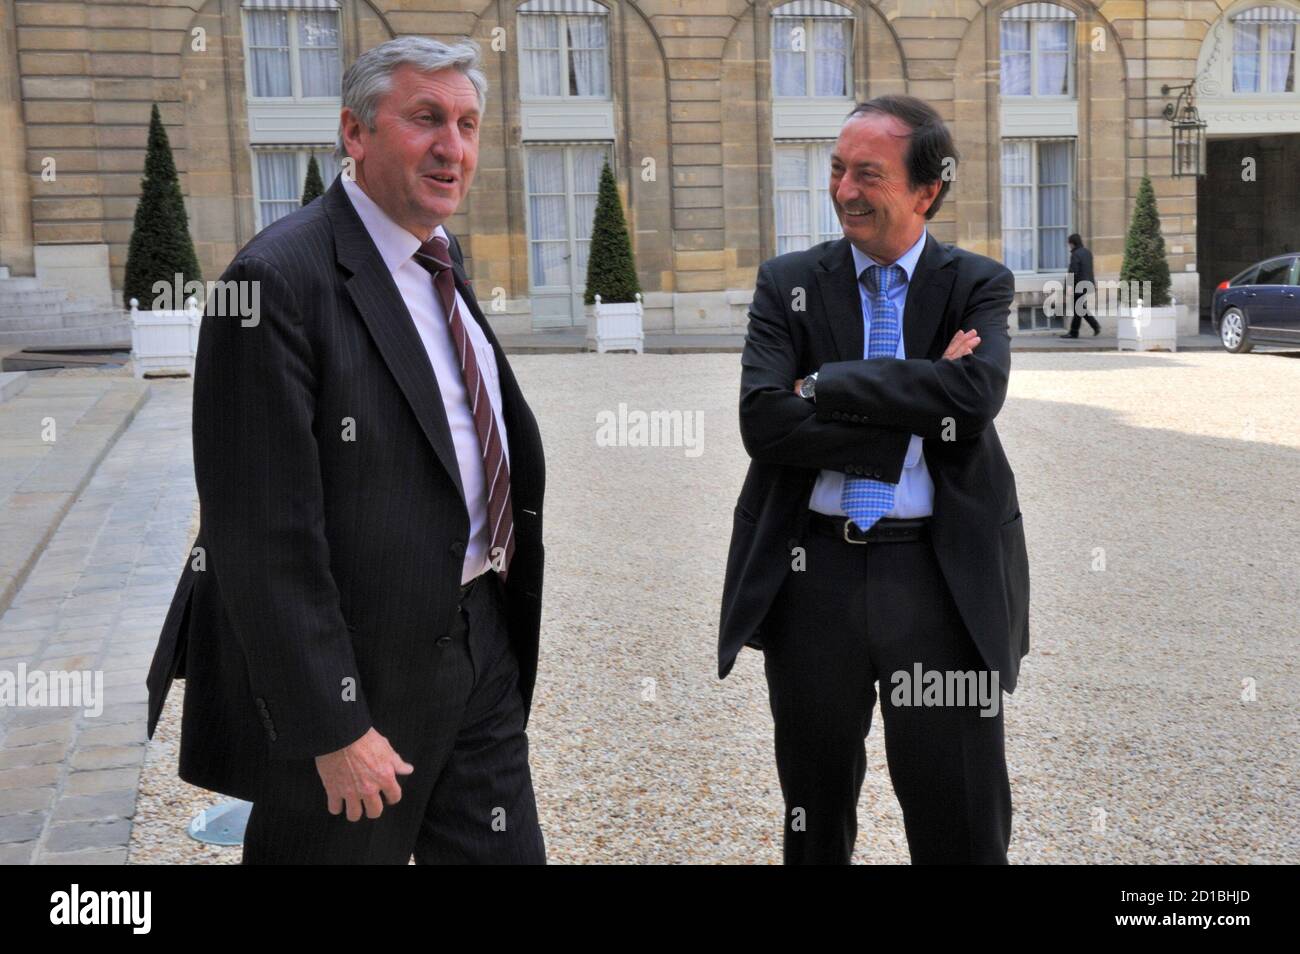 French retail group Leclerc CEO Michel-Edouard Leclerc (R) speaks with  French farmer Union FNSEA leader Jean-Michel Lemetayer as they arrive at  the Elysee Palace in Paris to attend a meeting between retailers,